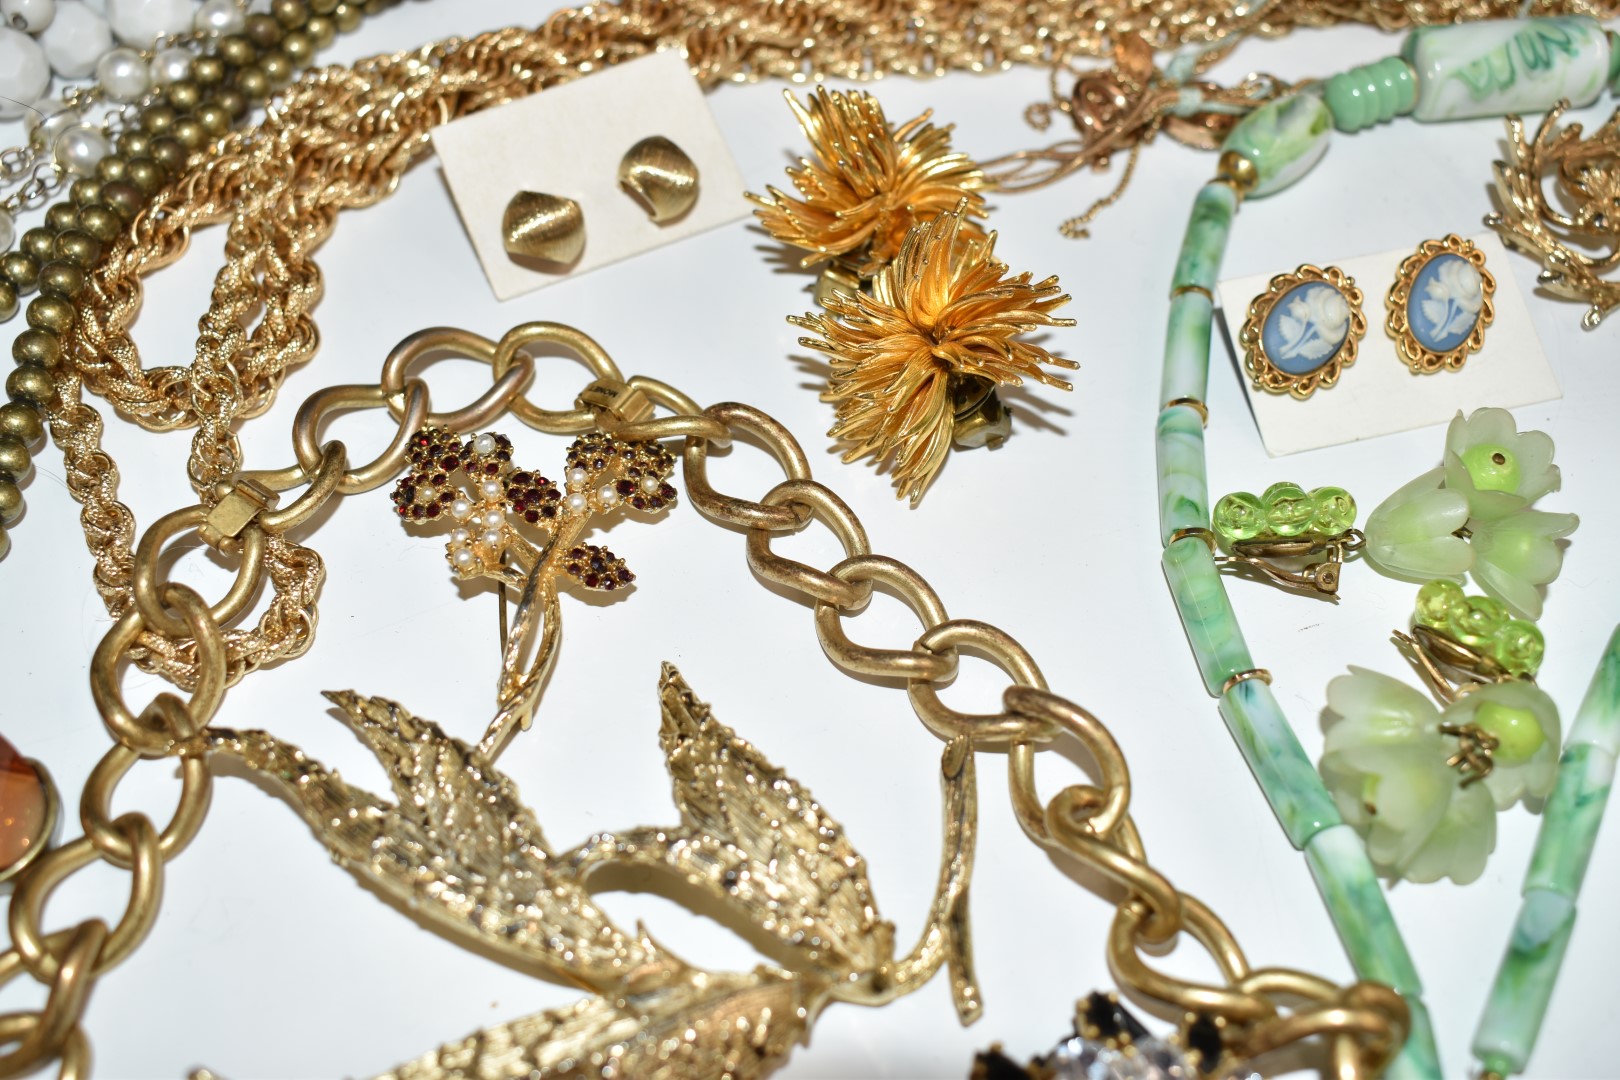 A collection of named costume jewellery including Avon, Napier, Sarah Coventry, Monet, Hollywood, - Image 15 of 19